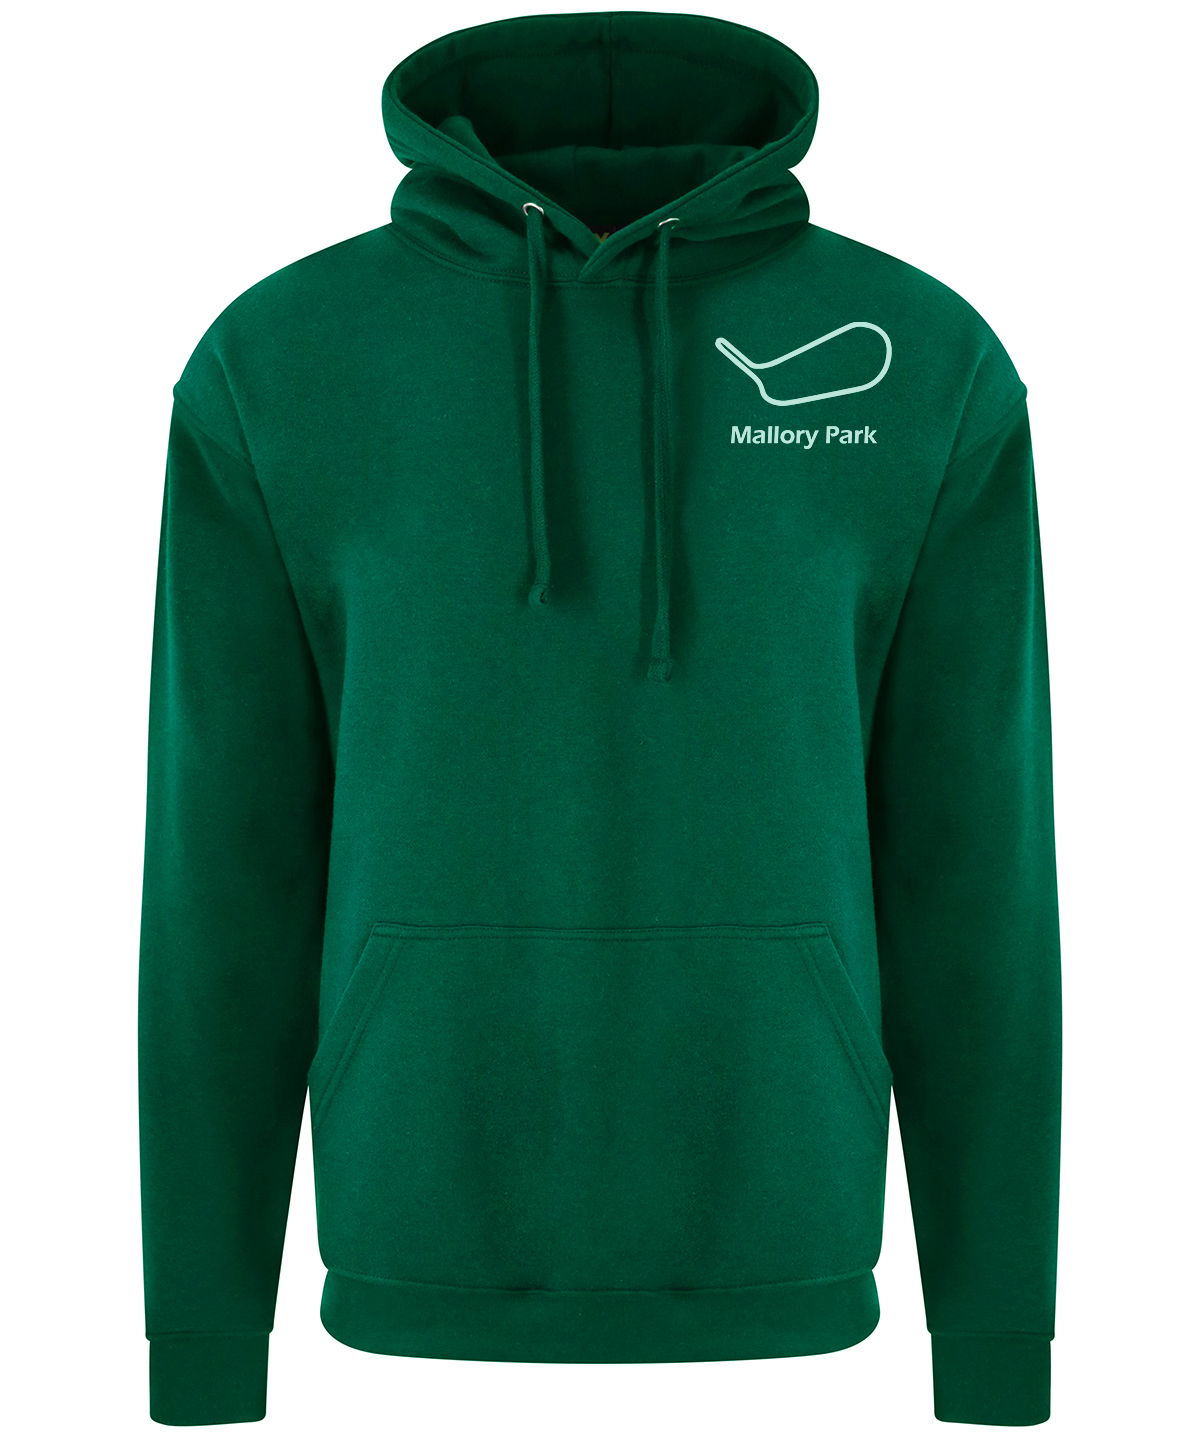 Mallory Park Hoodie